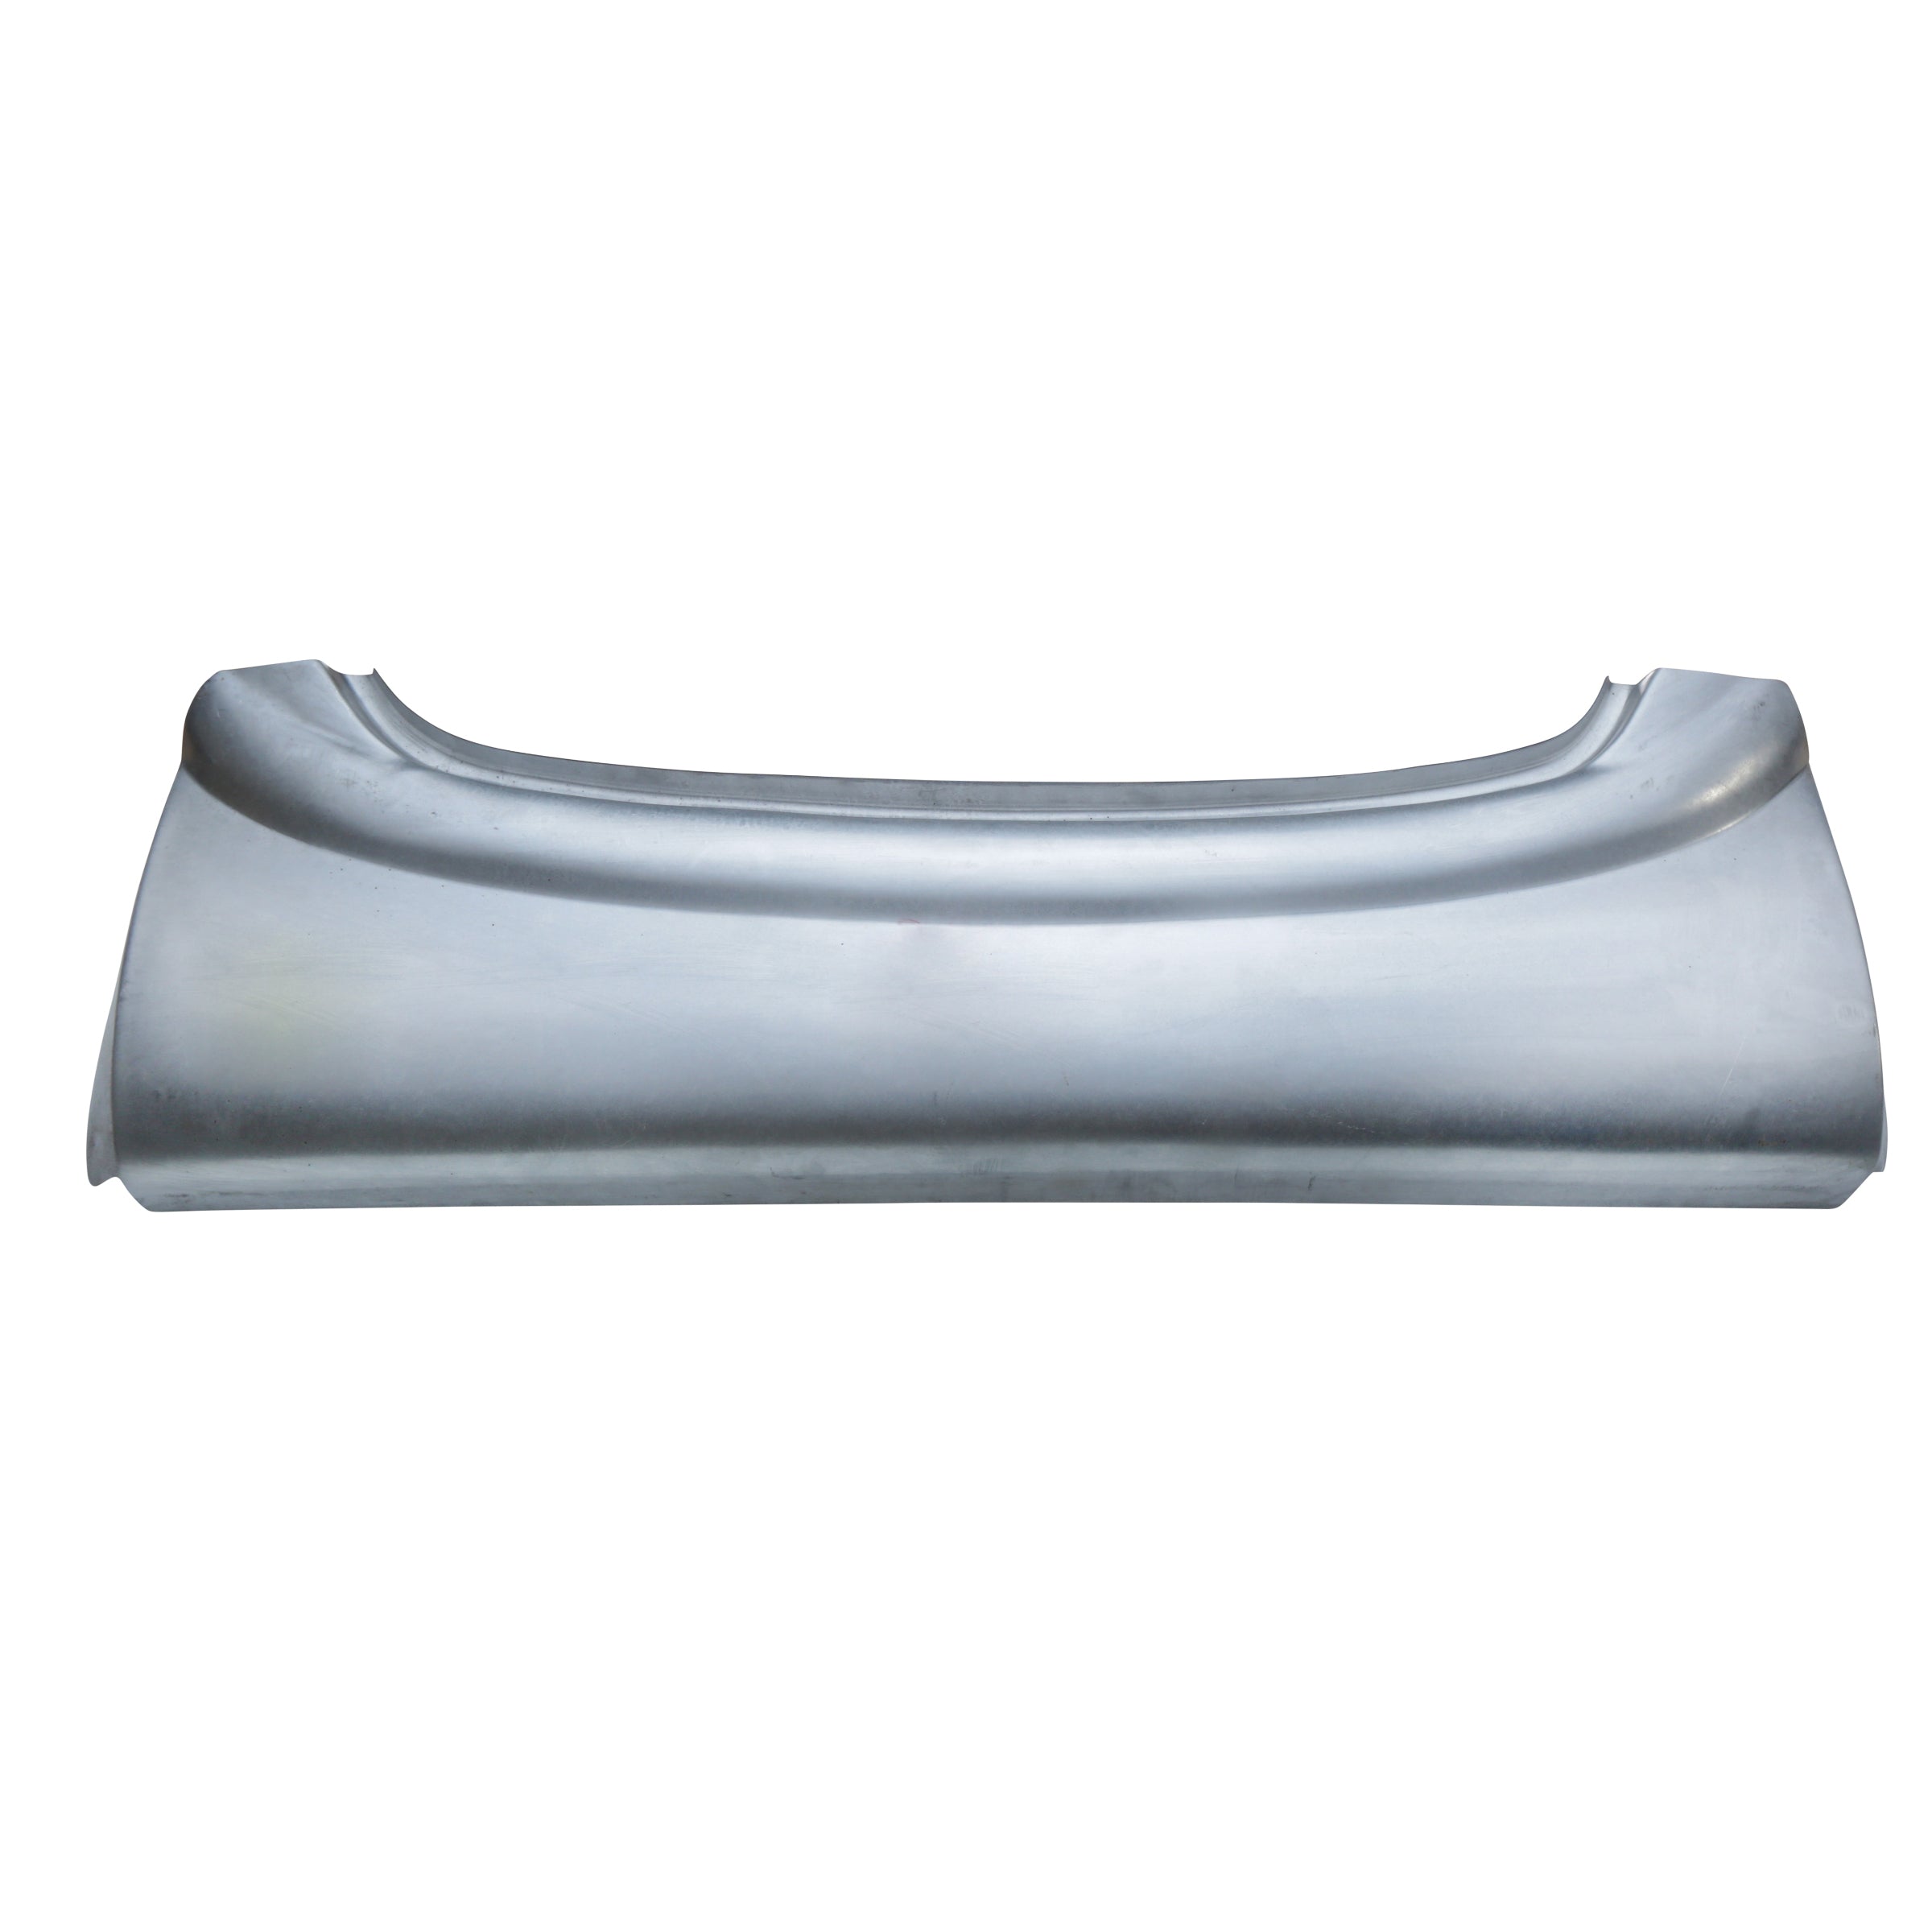 Below Trunk Lid Panel (Tail Pan) • 1937-38 Ford Coupe, Roadster, & Cabriolet